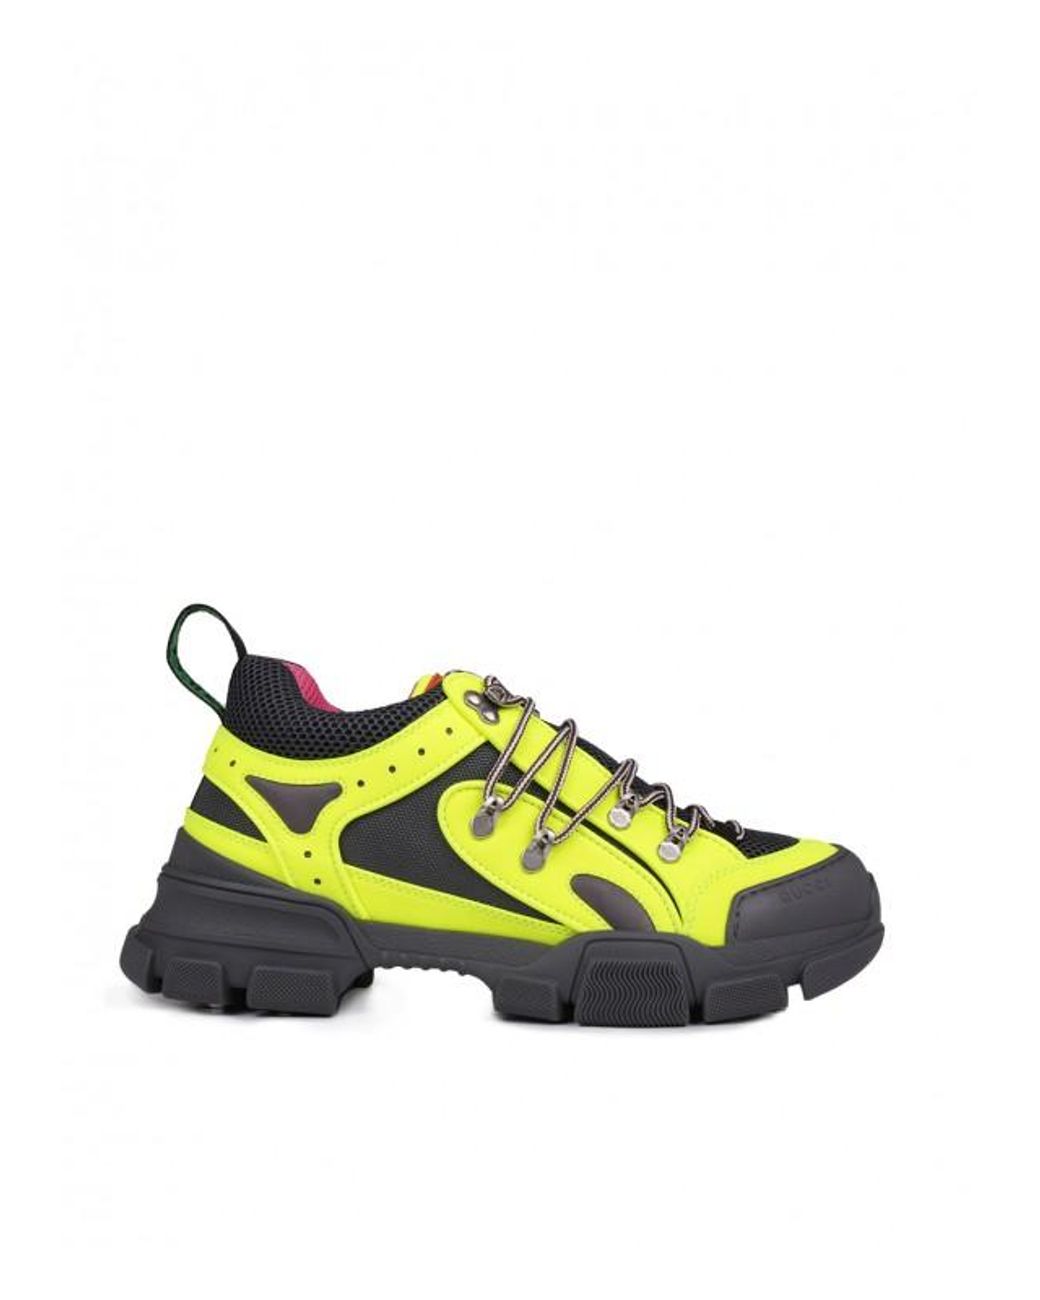 Gucci Sneakers Flashtrek in Yellow for Men - Save 25% - Lyst